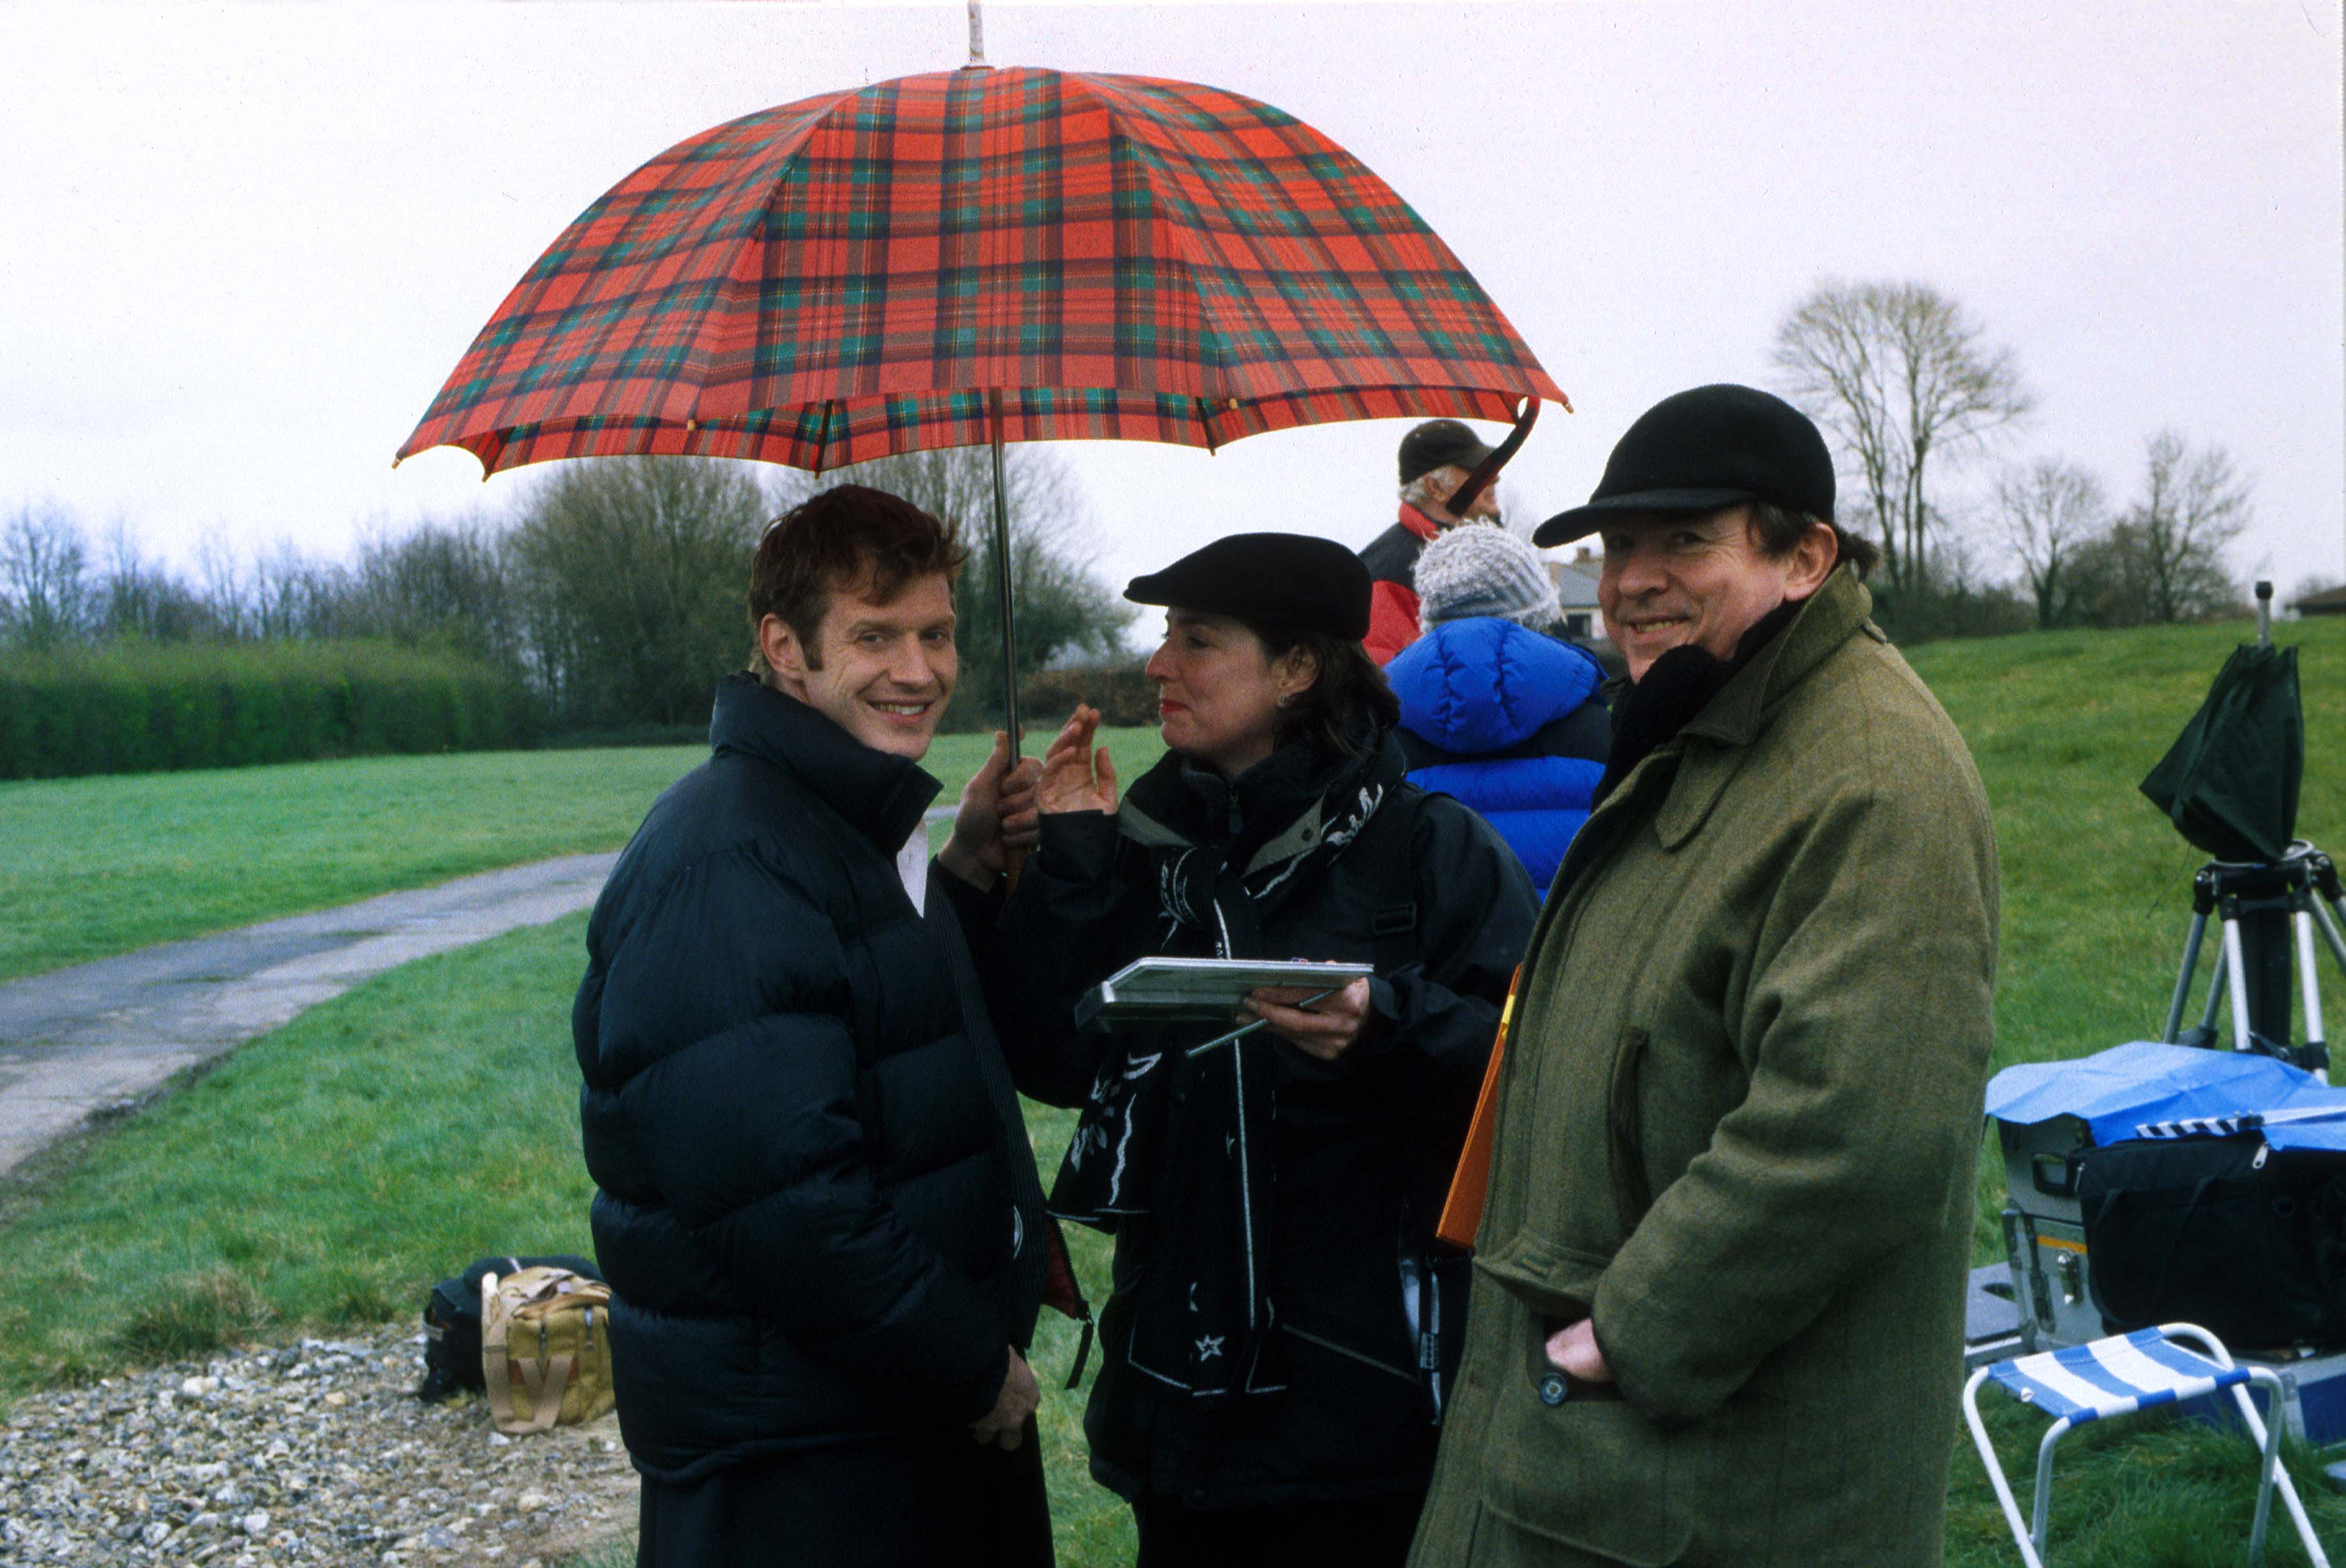 Jason Flemyng, director David Fairman and crew on the set of Lighthouse Hill